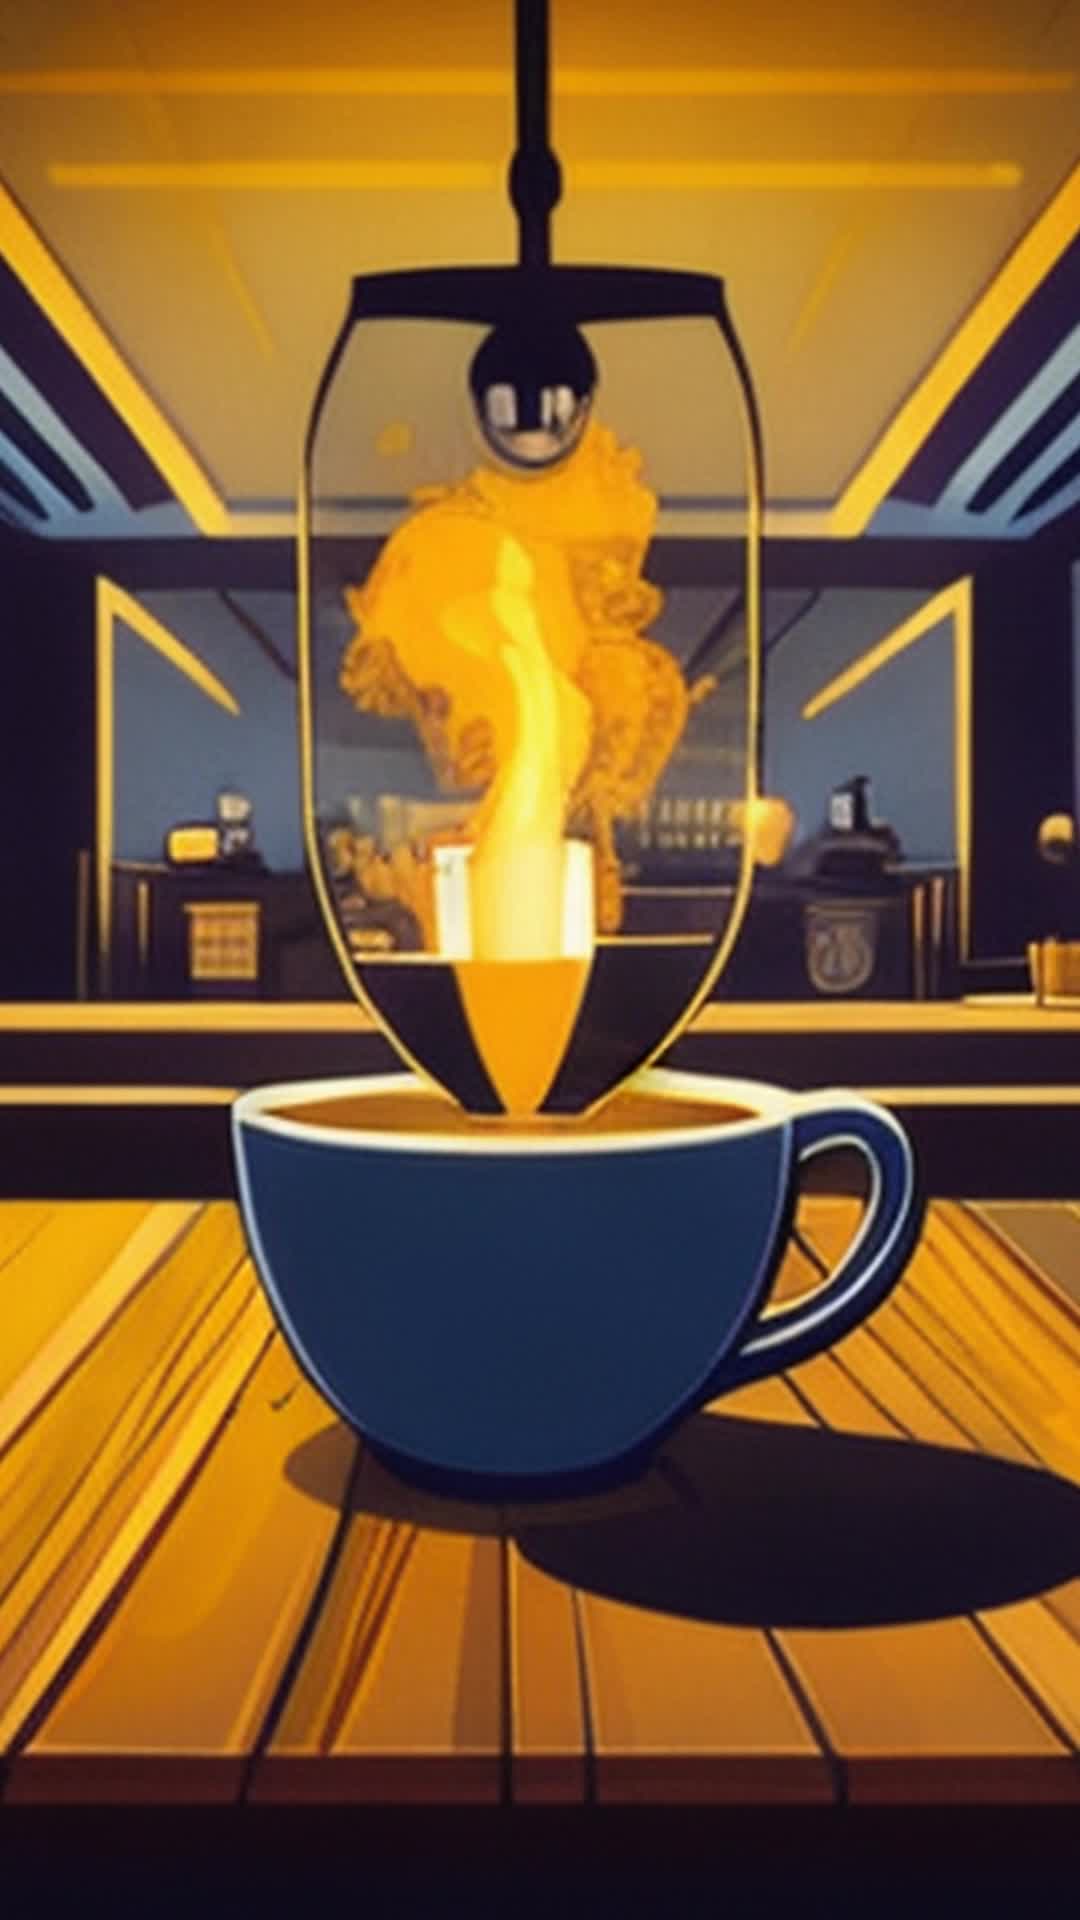 make the background completely dark and then have a light bulb from the ceiling shine on a smoking cup of coffee on a table whicch is the center of the scene